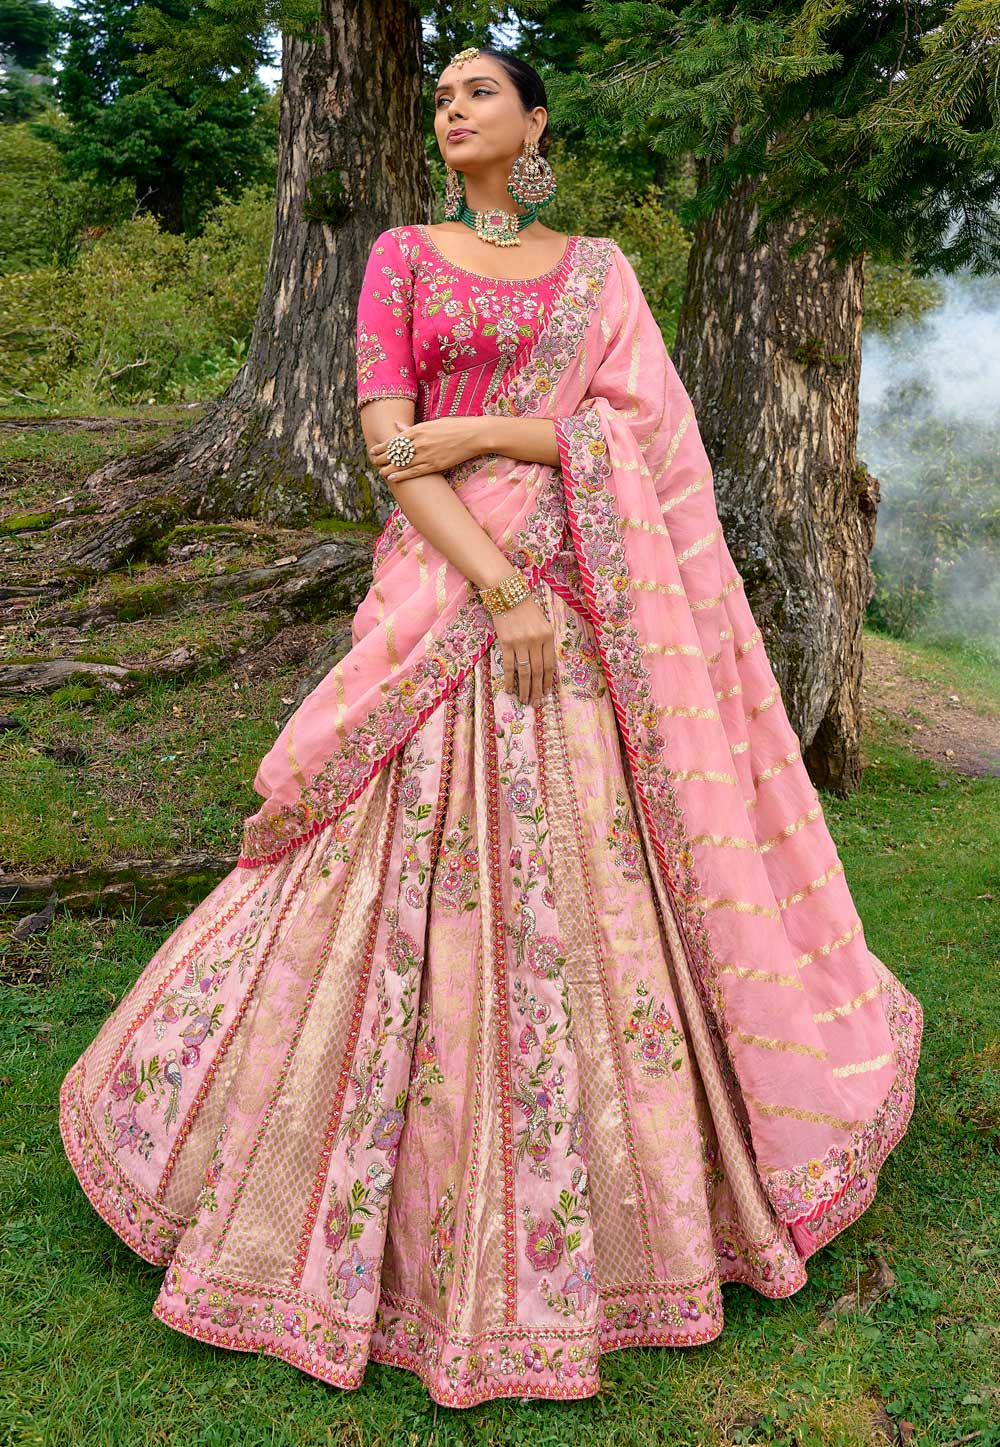 Photo of Bride twirling around in a baby pink lehenga.